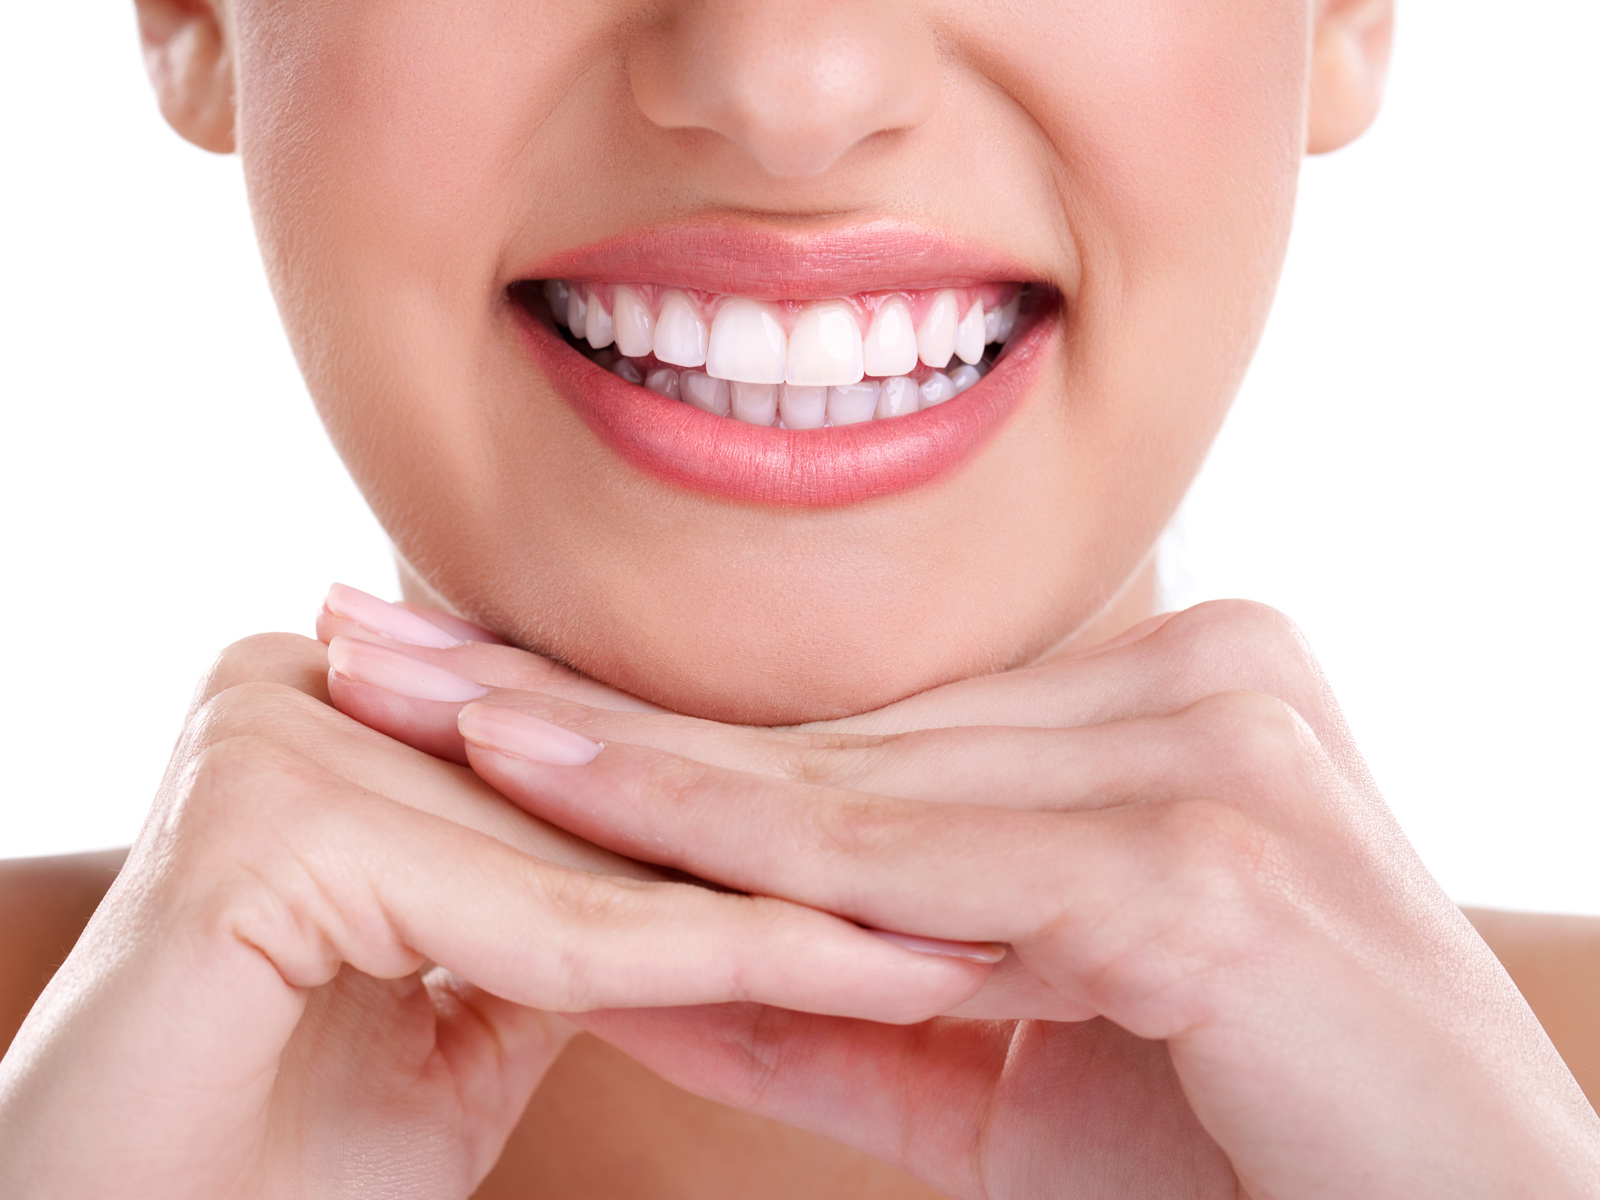 What’s the Best Way to Whiten Teeth?